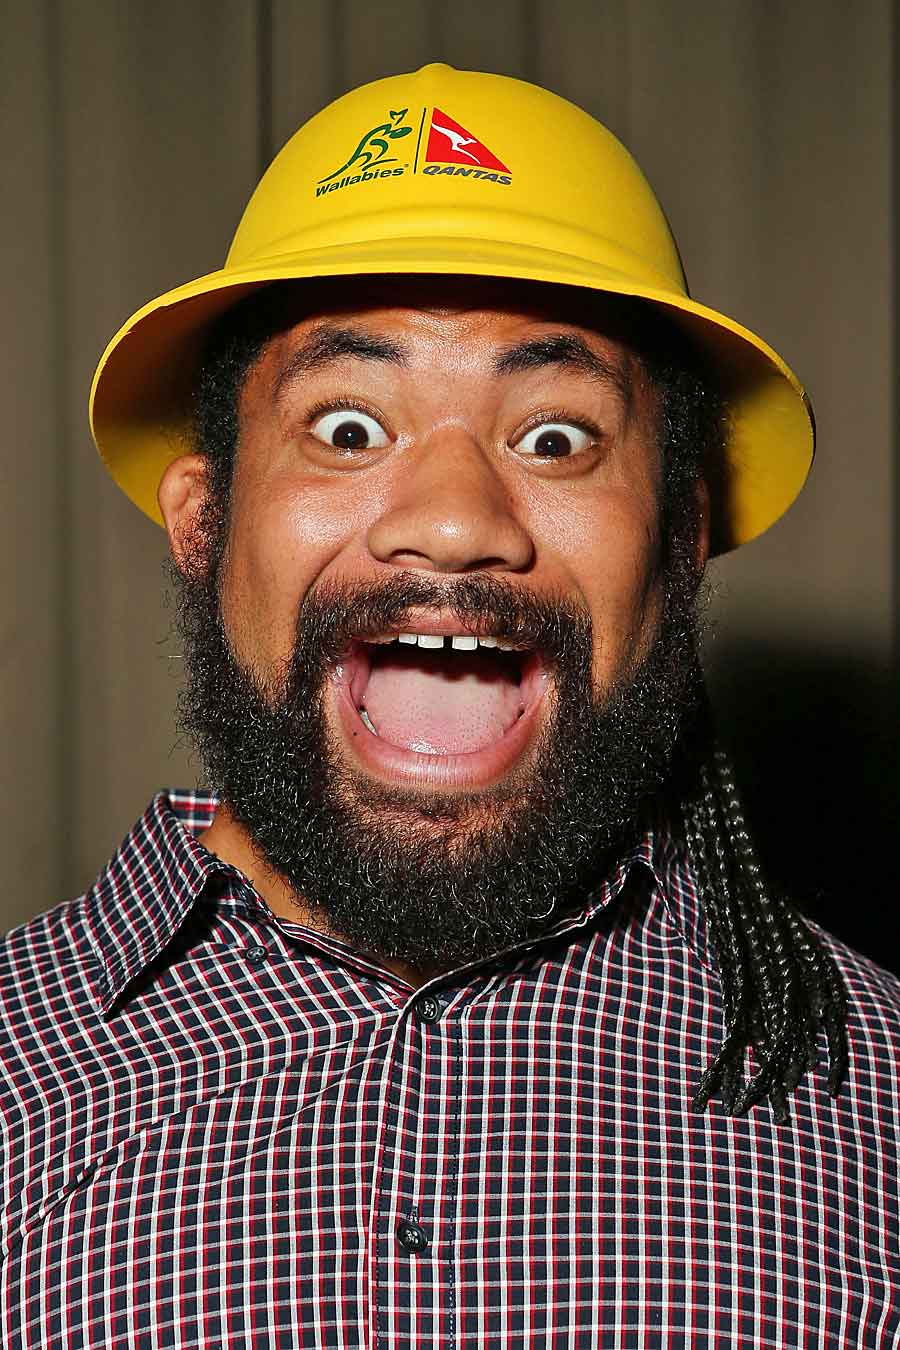 Tatafu Polota-Nau models one of the golden safari hats to be given away to Wallabies fans in order to combat the 'sea of red'